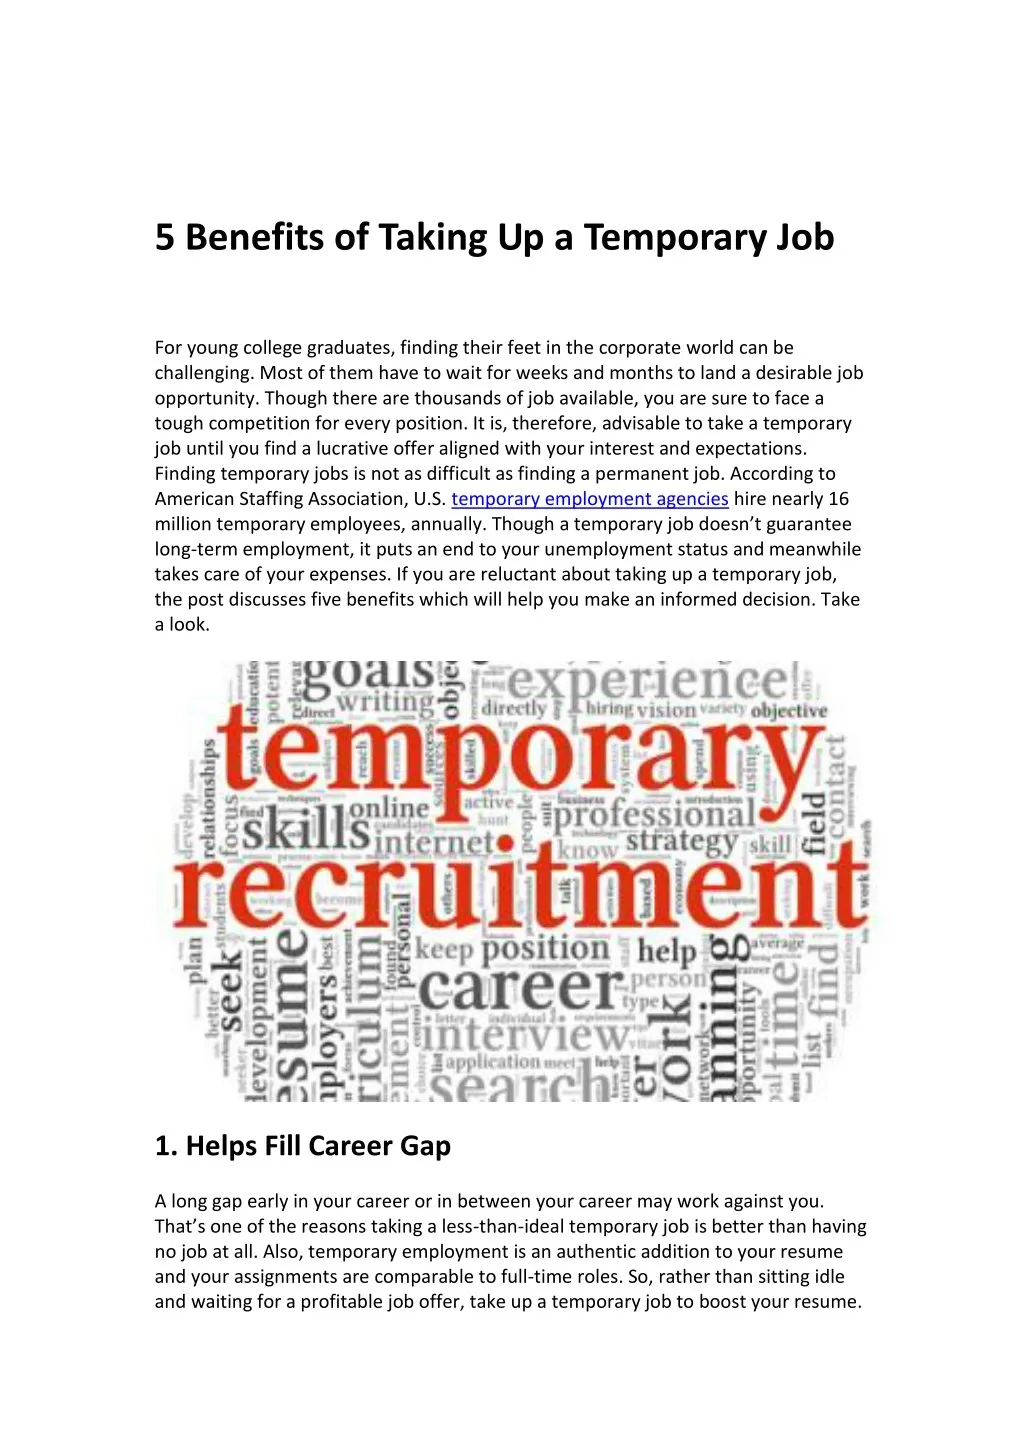 5 benefits of taking up a temporary job